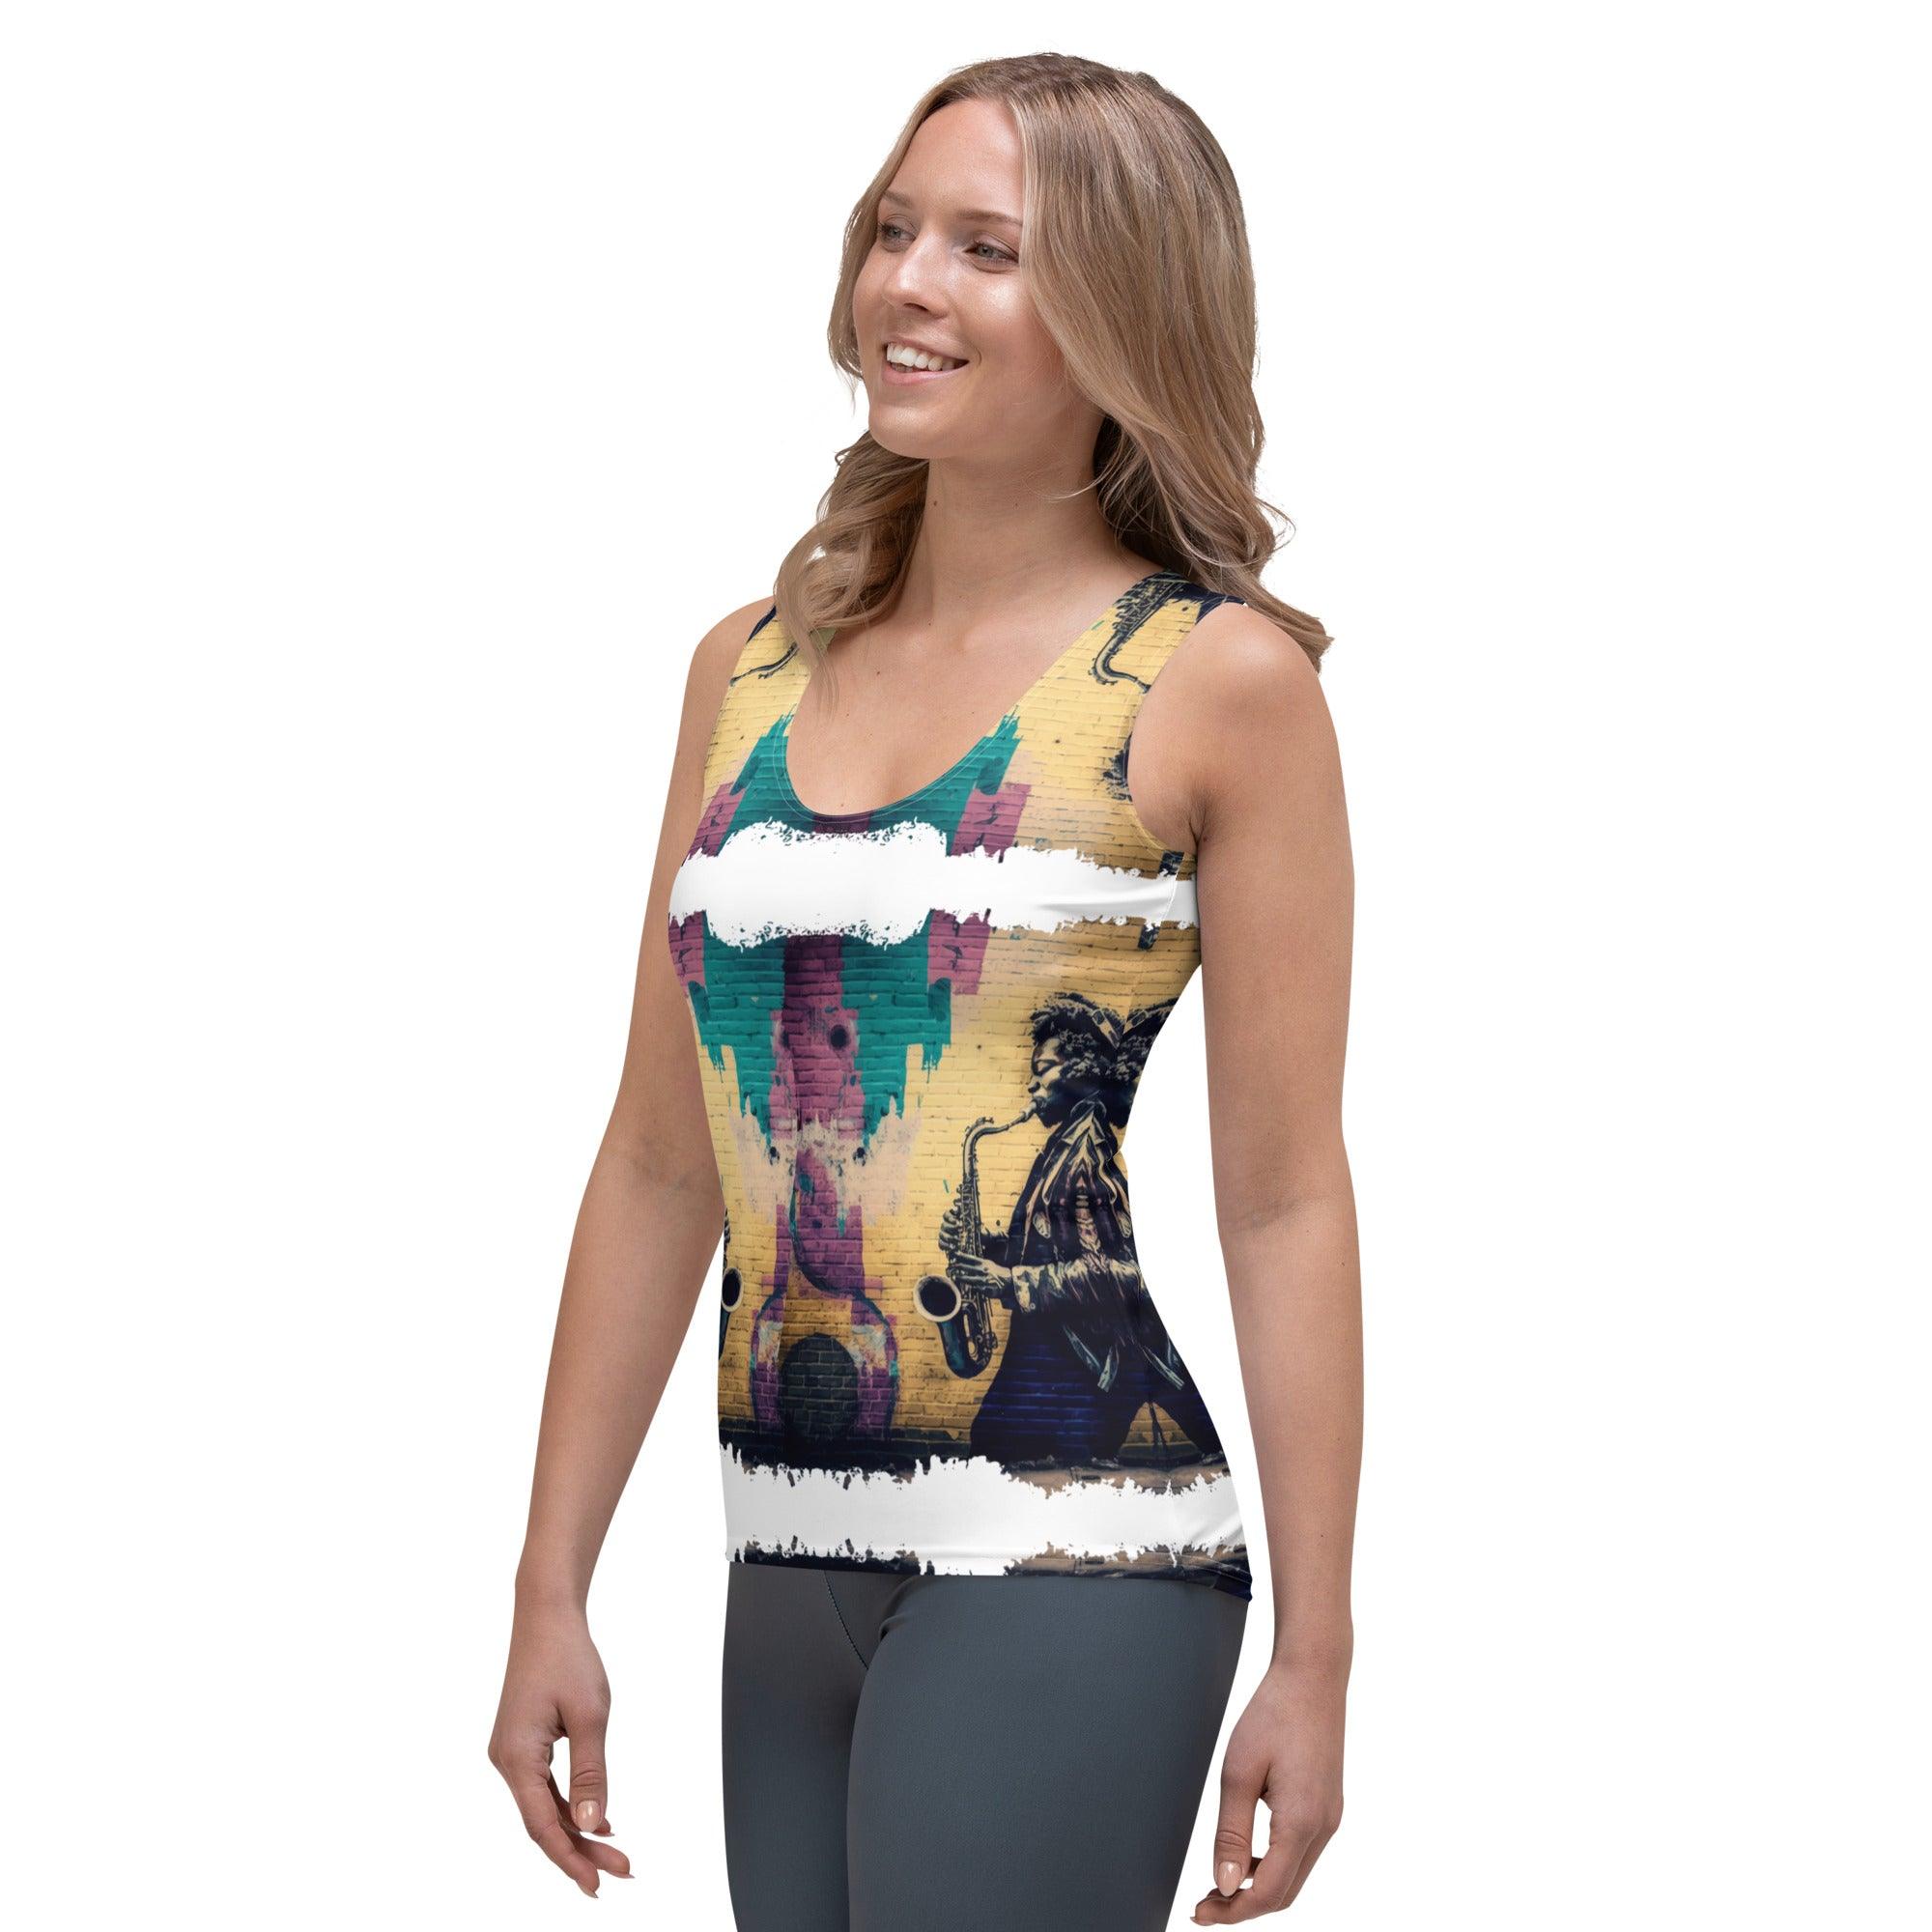 Blowin' Up A Storm Sublimation Cut & Sew Tank Top - Beyond T-shirts